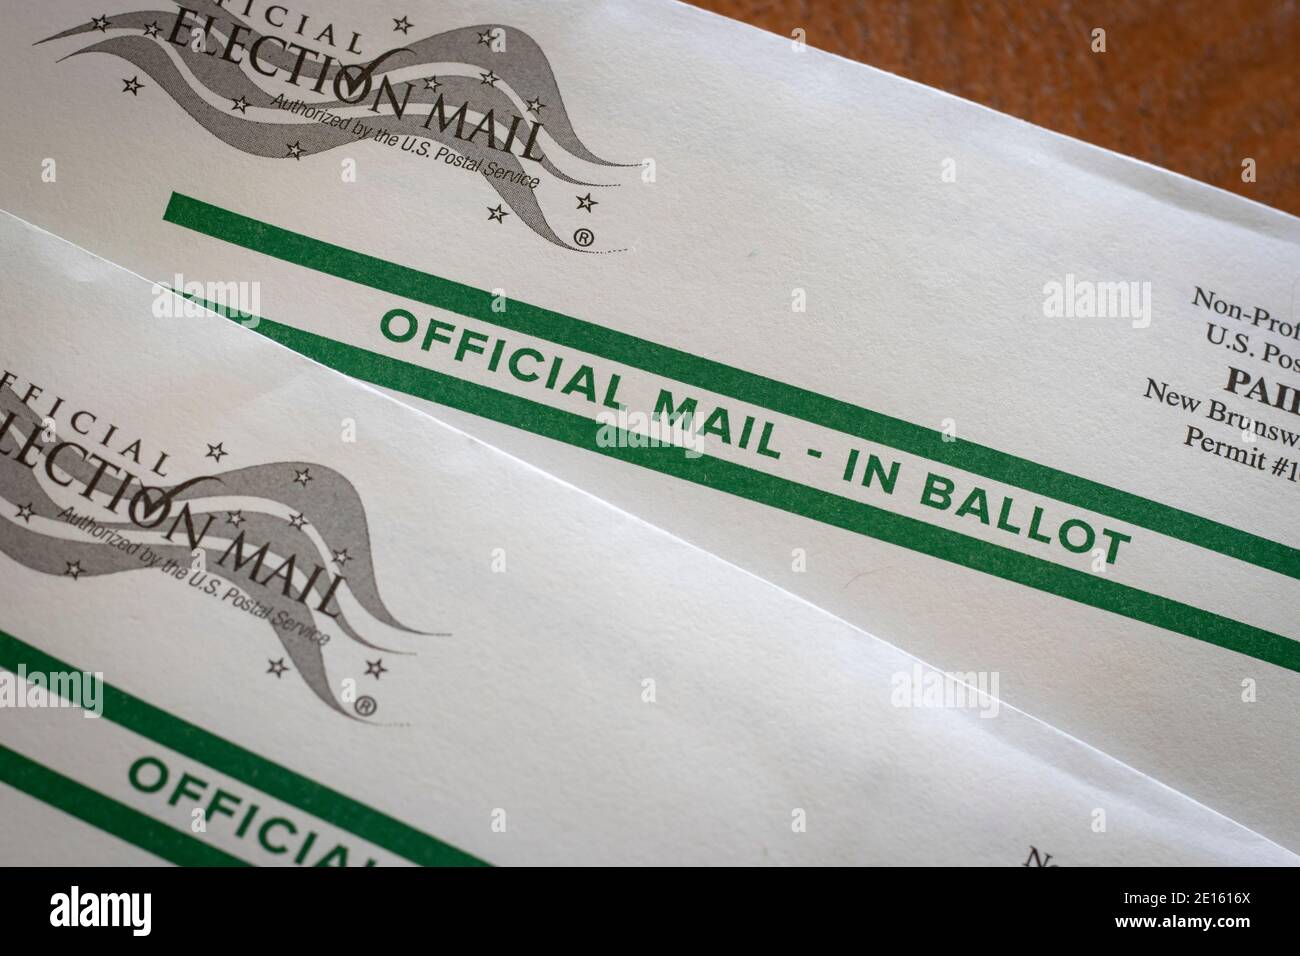 Official mail-in ballots for US general election Stock Photo